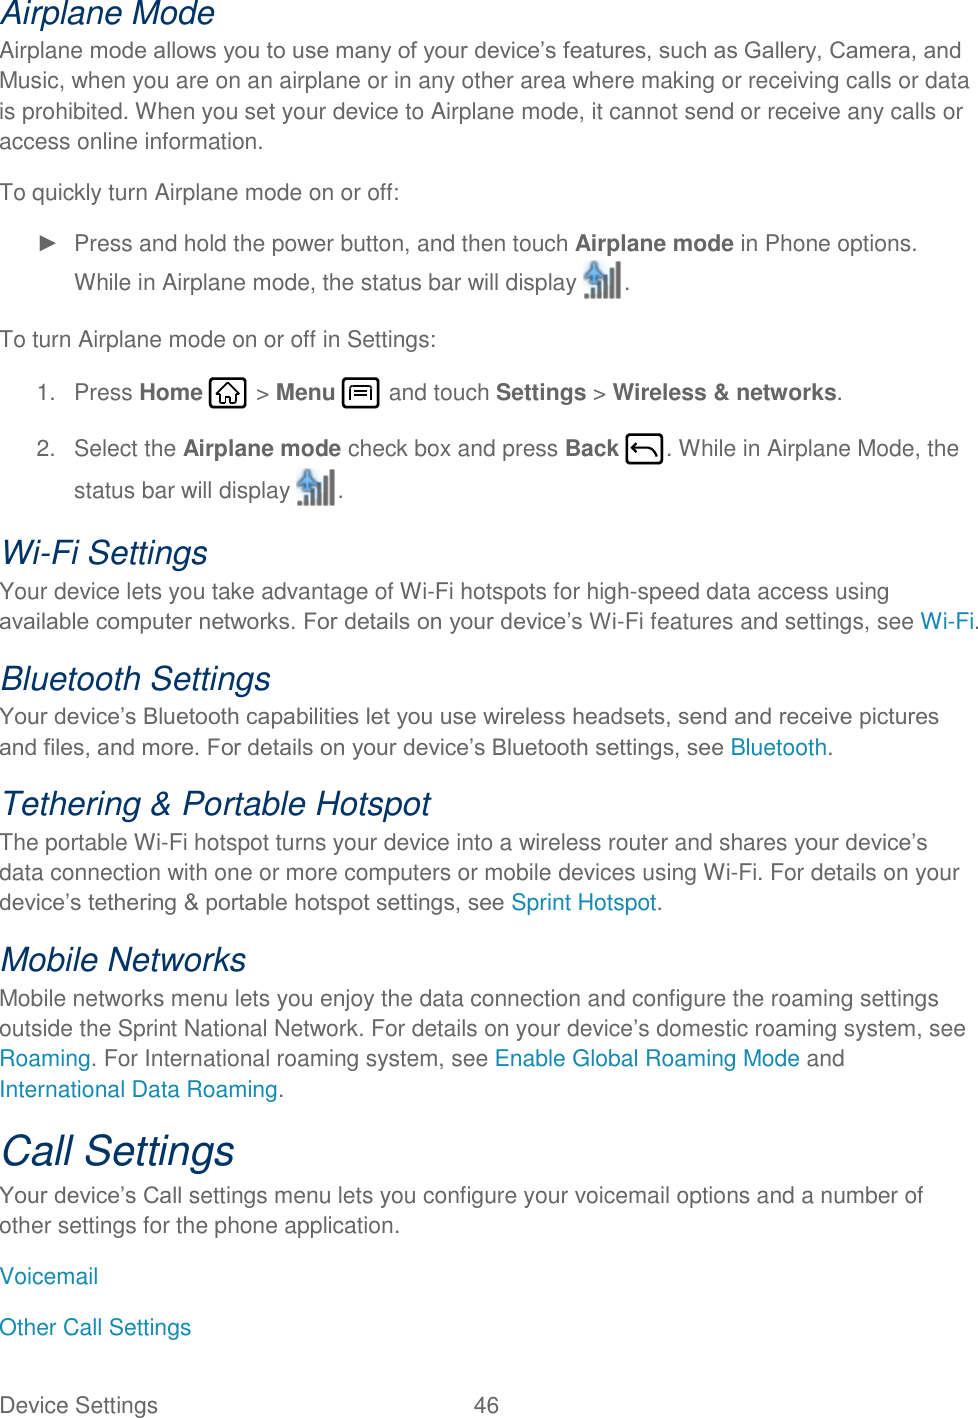 Device Settings  46   Airplane Mode Airplane mode allows you to use many of your device’s features, such as Gallery, Camera, and Music, when you are on an airplane or in any other area where making or receiving calls or data is prohibited. When you set your device to Airplane mode, it cannot send or receive any calls or access online information. To quickly turn Airplane mode on or off: ►  Press and hold the power button, and then touch Airplane mode in Phone options. While in Airplane mode, the status bar will display  . To turn Airplane mode on or off in Settings: 1.  Press Home   &gt; Menu   and touch Settings &gt; Wireless &amp; networks. 2.  Select the Airplane mode check box and press Back  . While in Airplane Mode, the status bar will display  . Wi-Fi Settings Your device lets you take advantage of Wi-Fi hotspots for high-speed data access using available computer networks. For details on your device’s Wi-Fi features and settings, see Wi-Fi. Bluetooth Settings Your device’s Bluetooth capabilities let you use wireless headsets, send and receive pictures and files, and more. For details on your device’s Bluetooth settings, see Bluetooth. Tethering &amp; Portable Hotspot The portable Wi-Fi hotspot turns your device into a wireless router and shares your device’s data connection with one or more computers or mobile devices using Wi-Fi. For details on your device’s tethering &amp; portable hotspot settings, see Sprint Hotspot. Mobile Networks Mobile networks menu lets you enjoy the data connection and configure the roaming settings outside the Sprint National Network. For details on your device’s domestic roaming system, see Roaming. For International roaming system, see Enable Global Roaming Mode and International Data Roaming. Call Settings Your device’s Call settings menu lets you configure your voicemail options and a number of other settings for the phone application. Voicemail Other Call Settings 